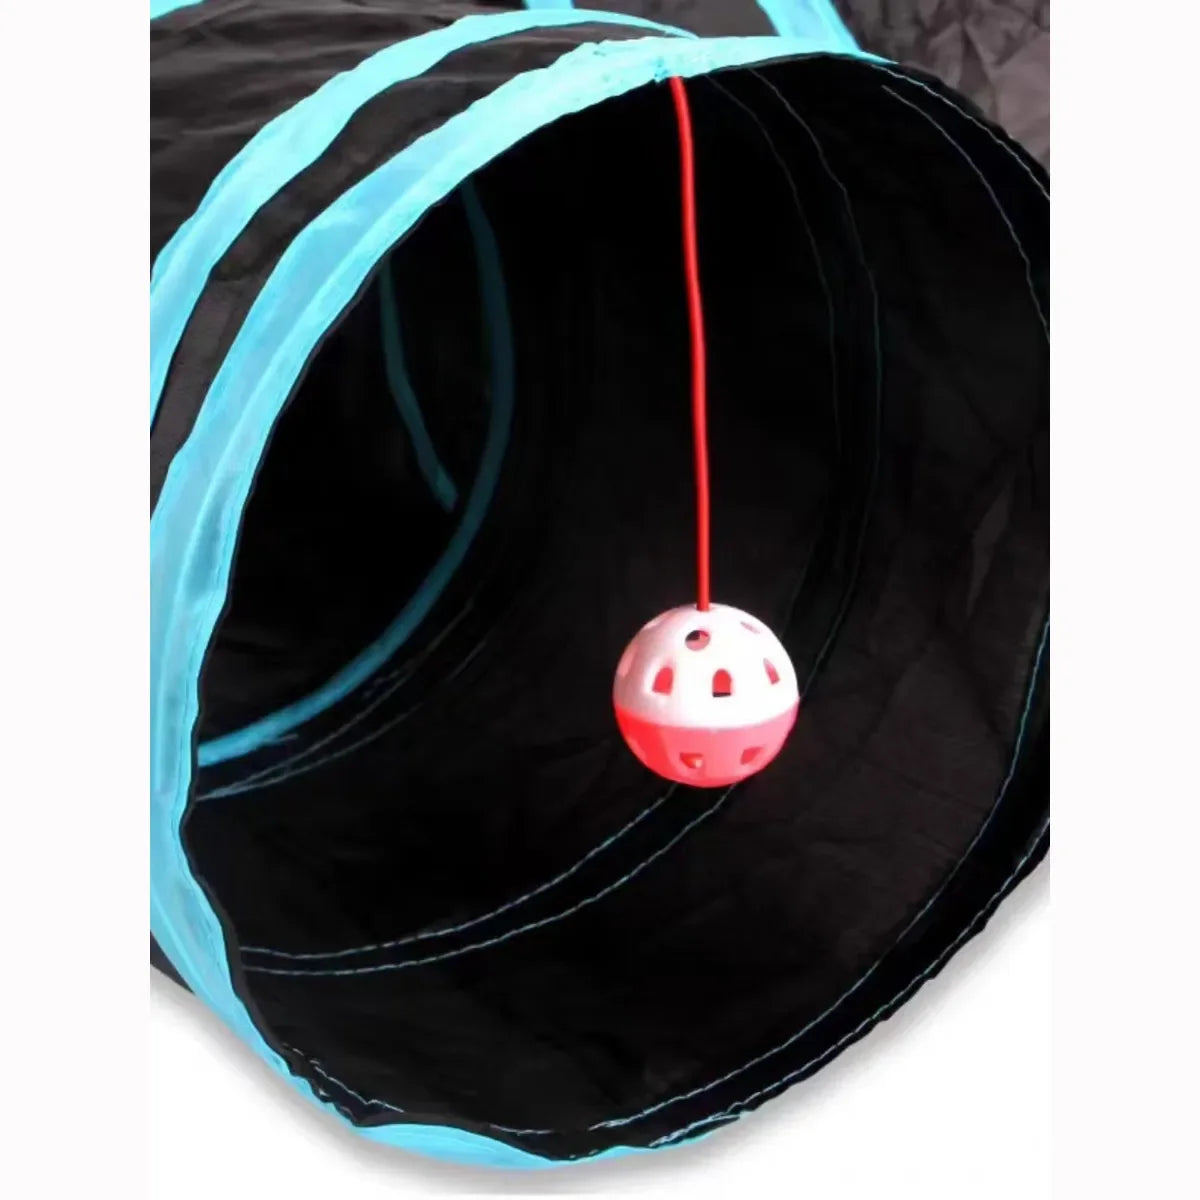 Wear-resistant Cat Play Tunnel Foldable Pet Animal Tunnels with Crinkle Playing Toy for Cats Guinea Pig Rabbits Funny Cat Supply